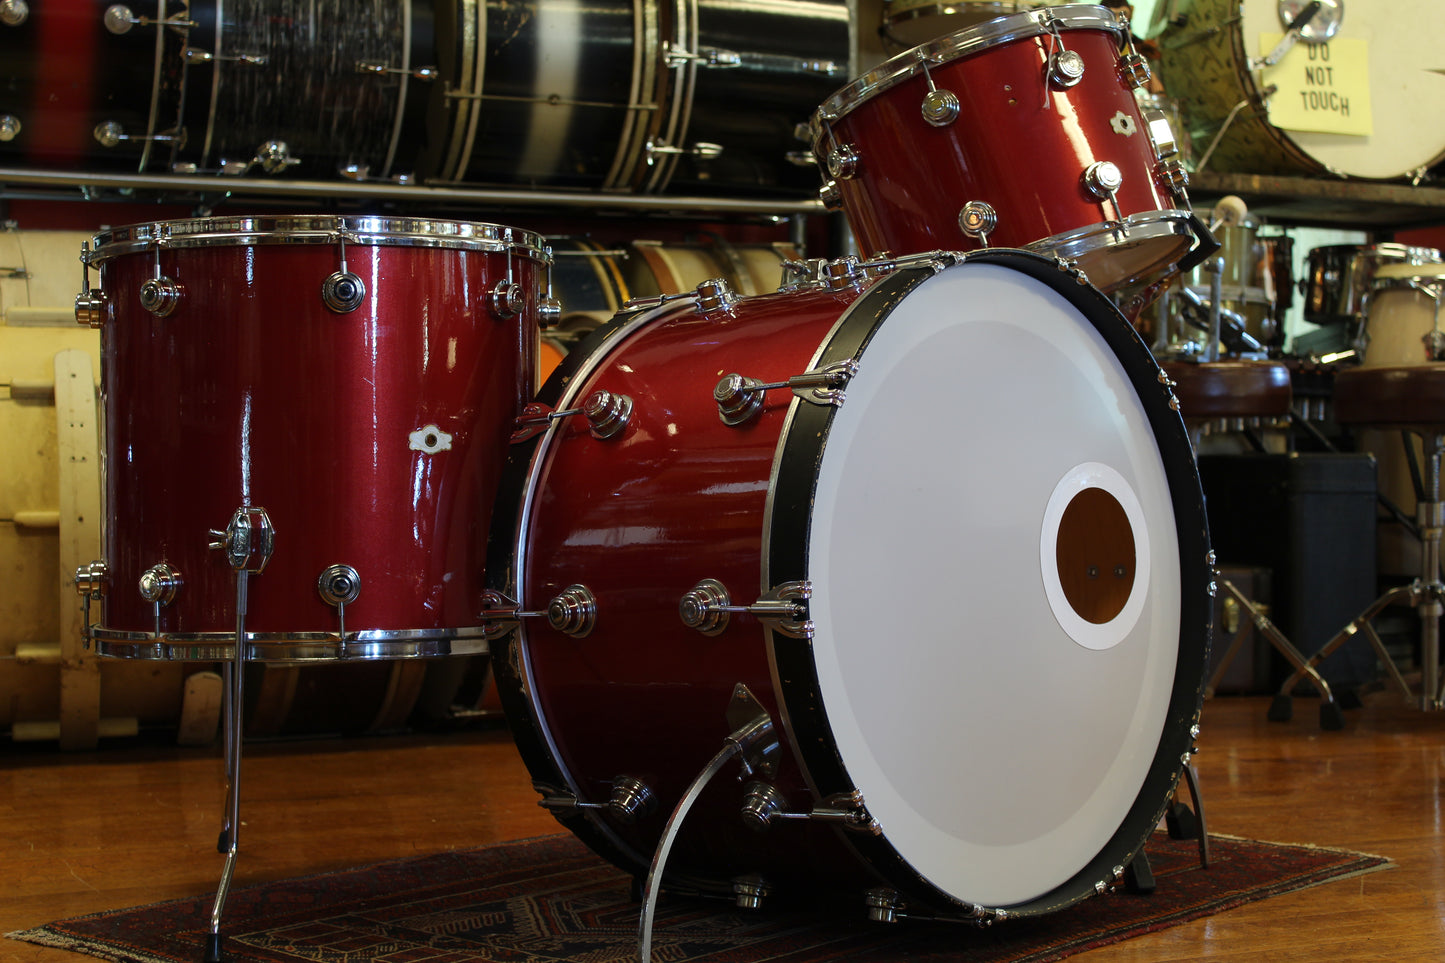 1970s Camco Chanute era kit in Candy Apple Red 14x24 10x14 16x18